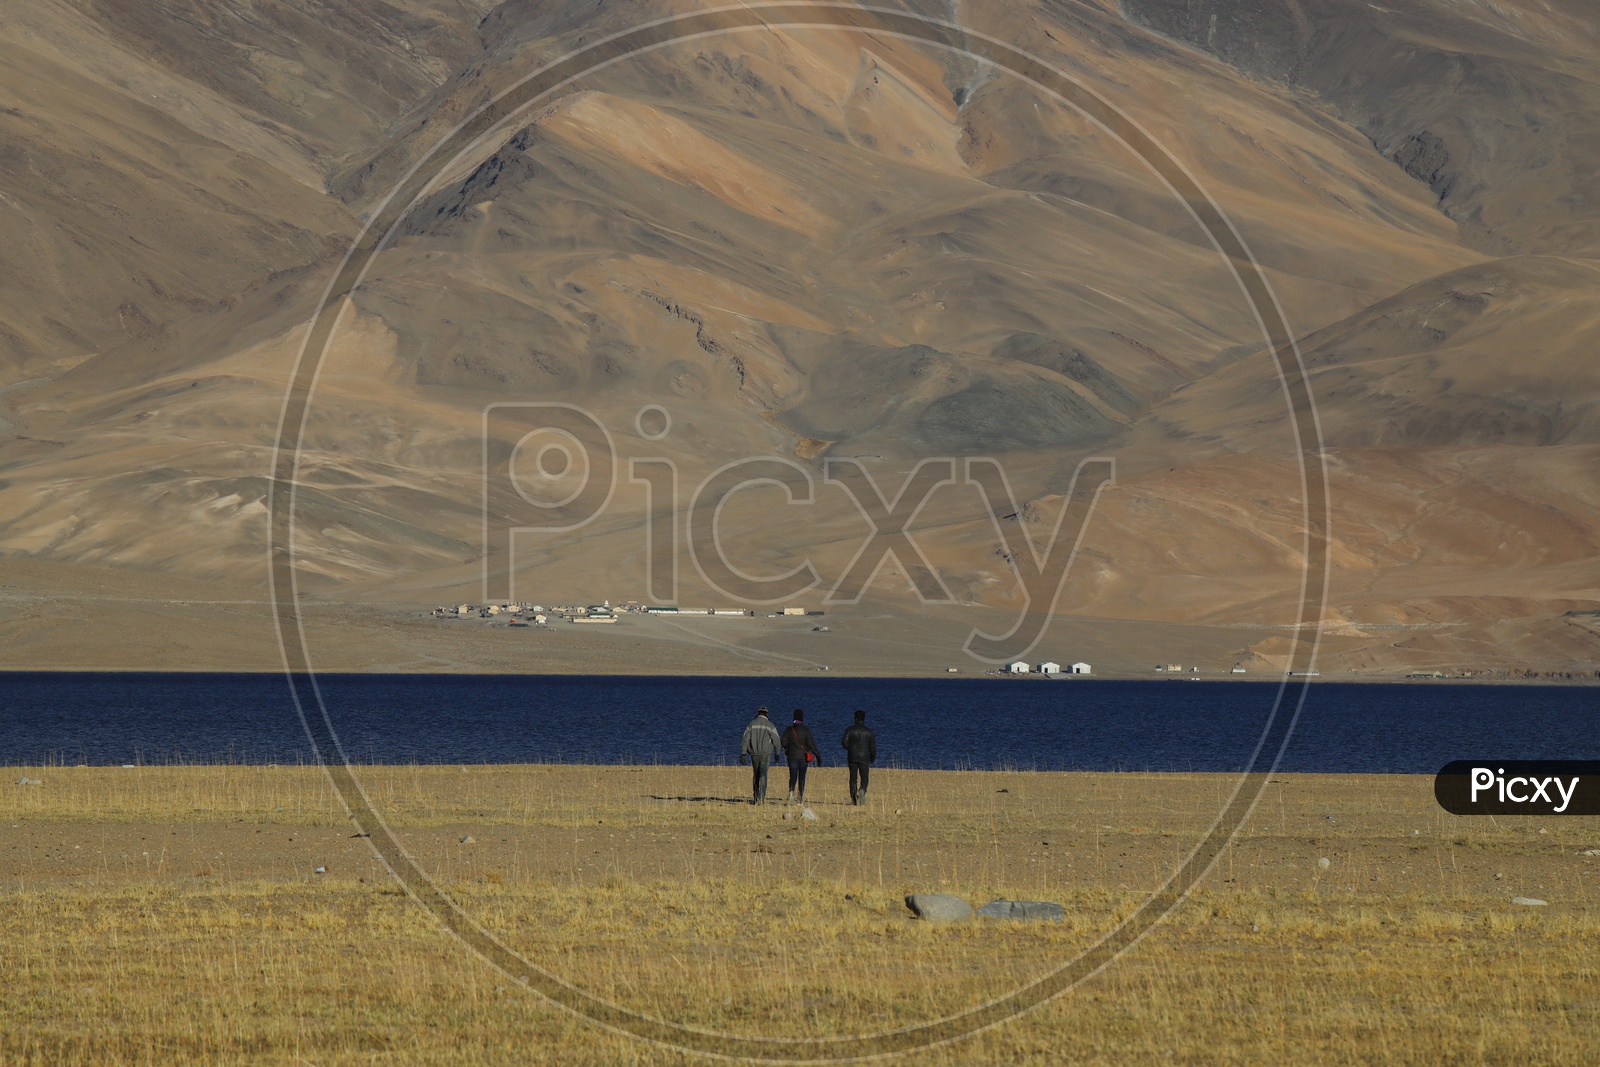 Tourists in The River Valleys Of Leh with Sand Dunes In Background